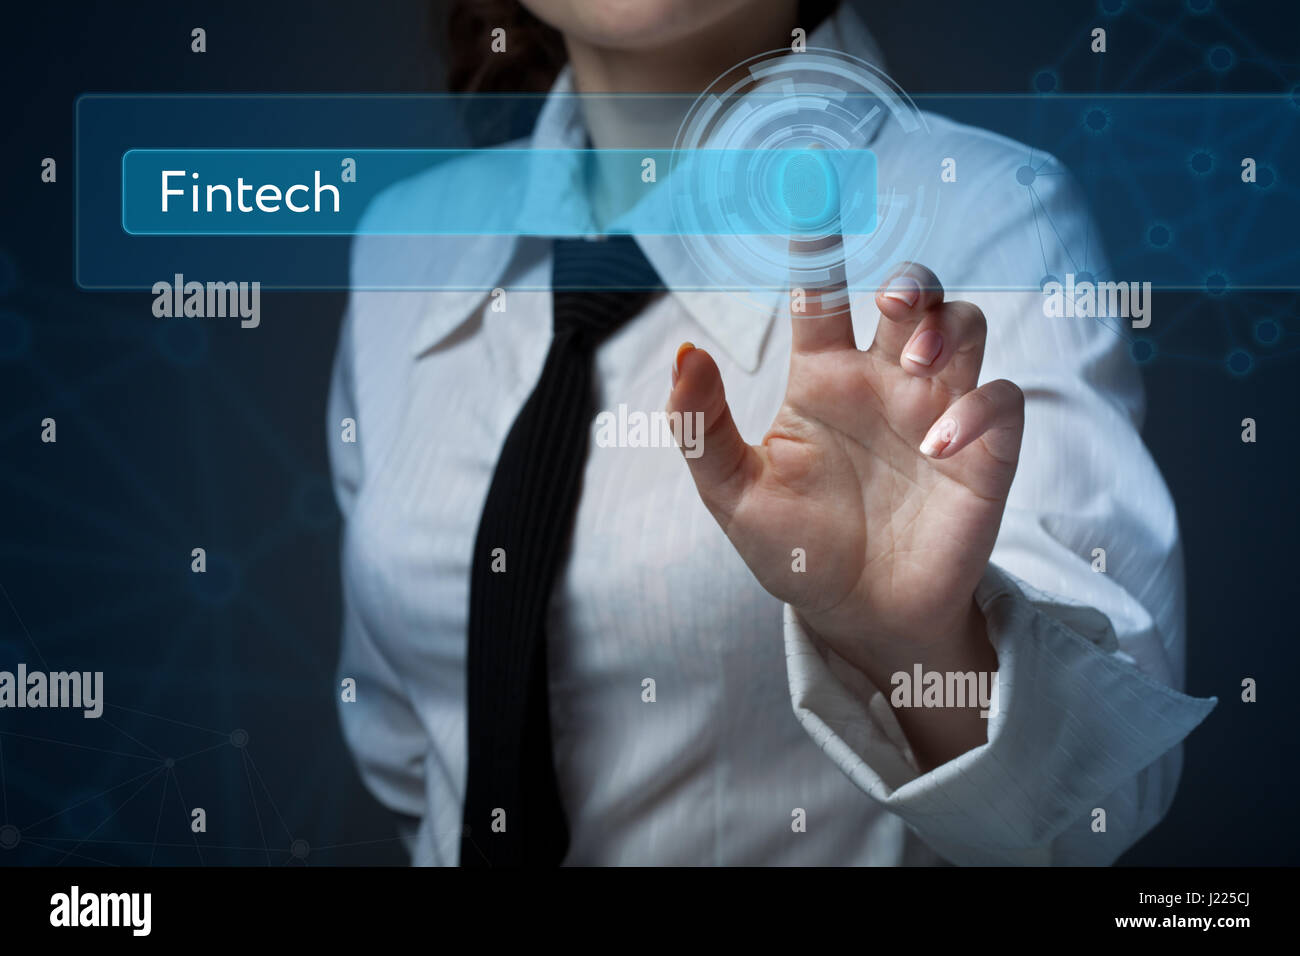 Business, technology, internet and networking concept. Business woman presses a button on the virtual screen: Fintech Stock Photo